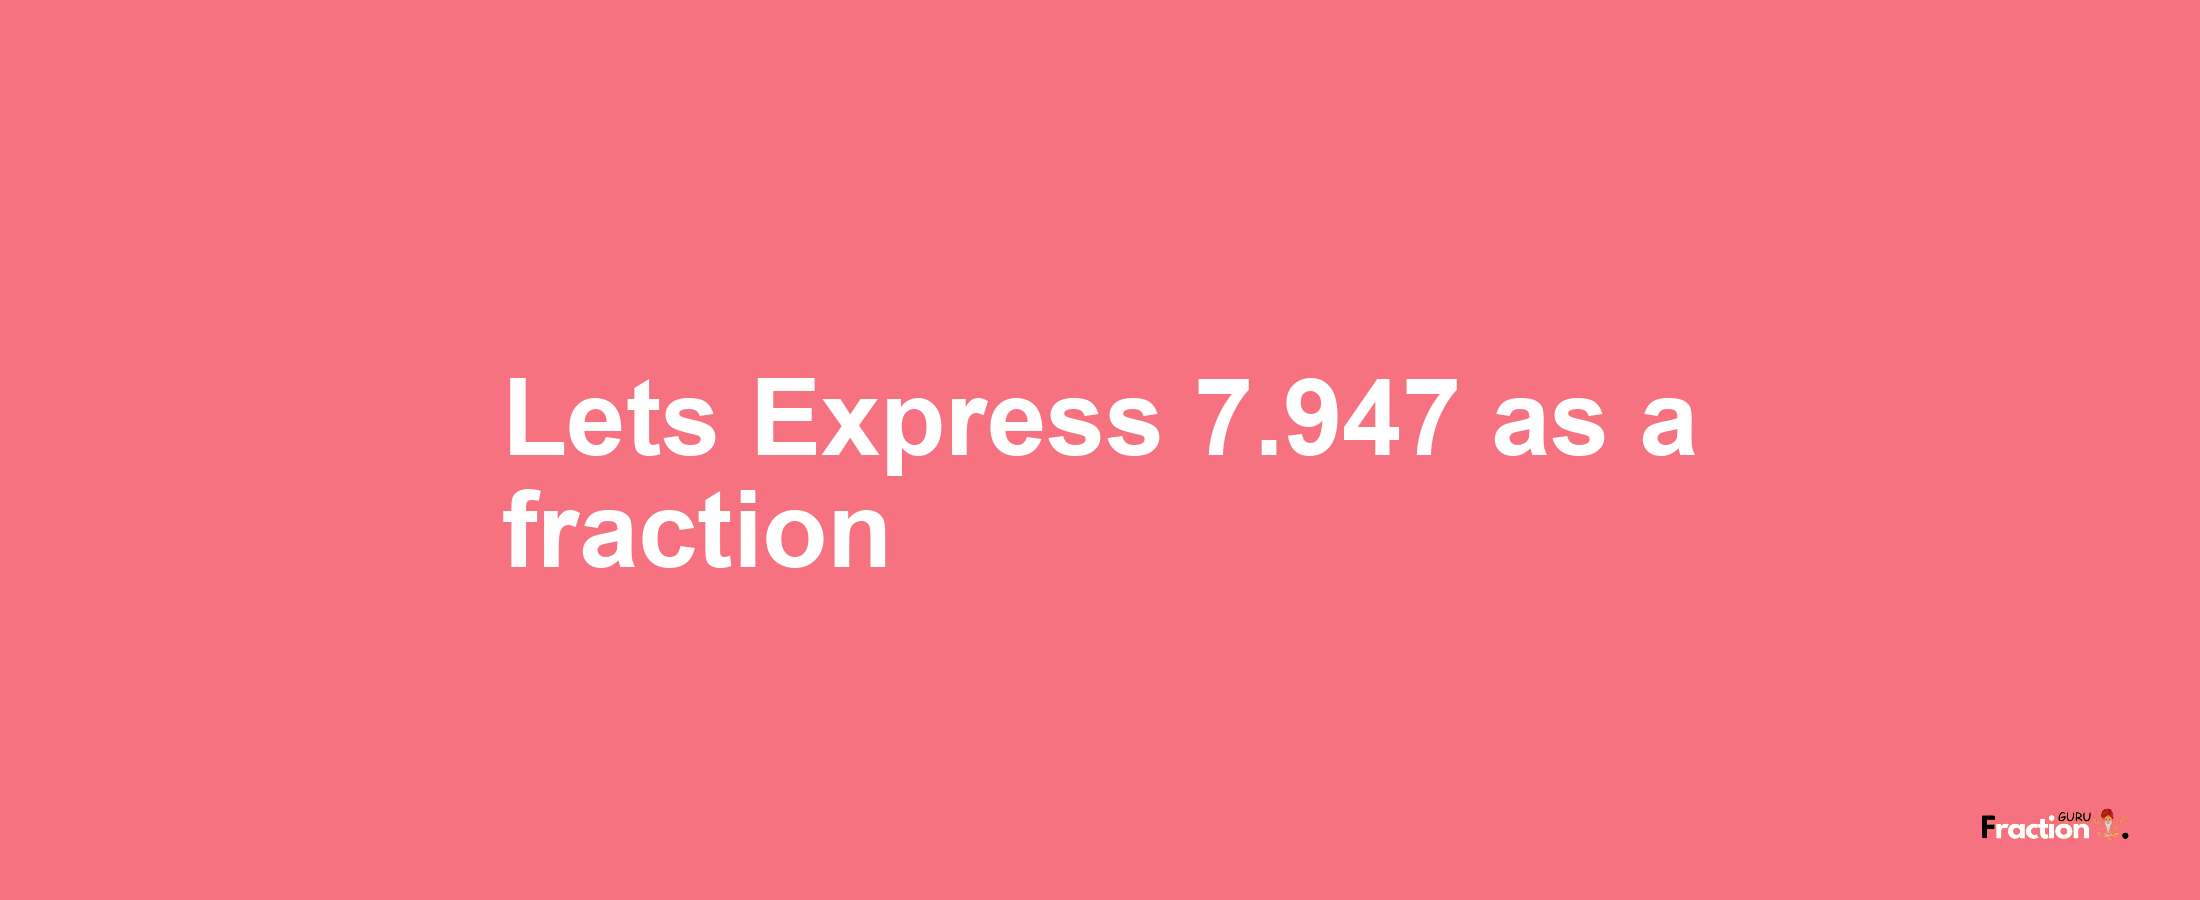 Lets Express 7.947 as afraction